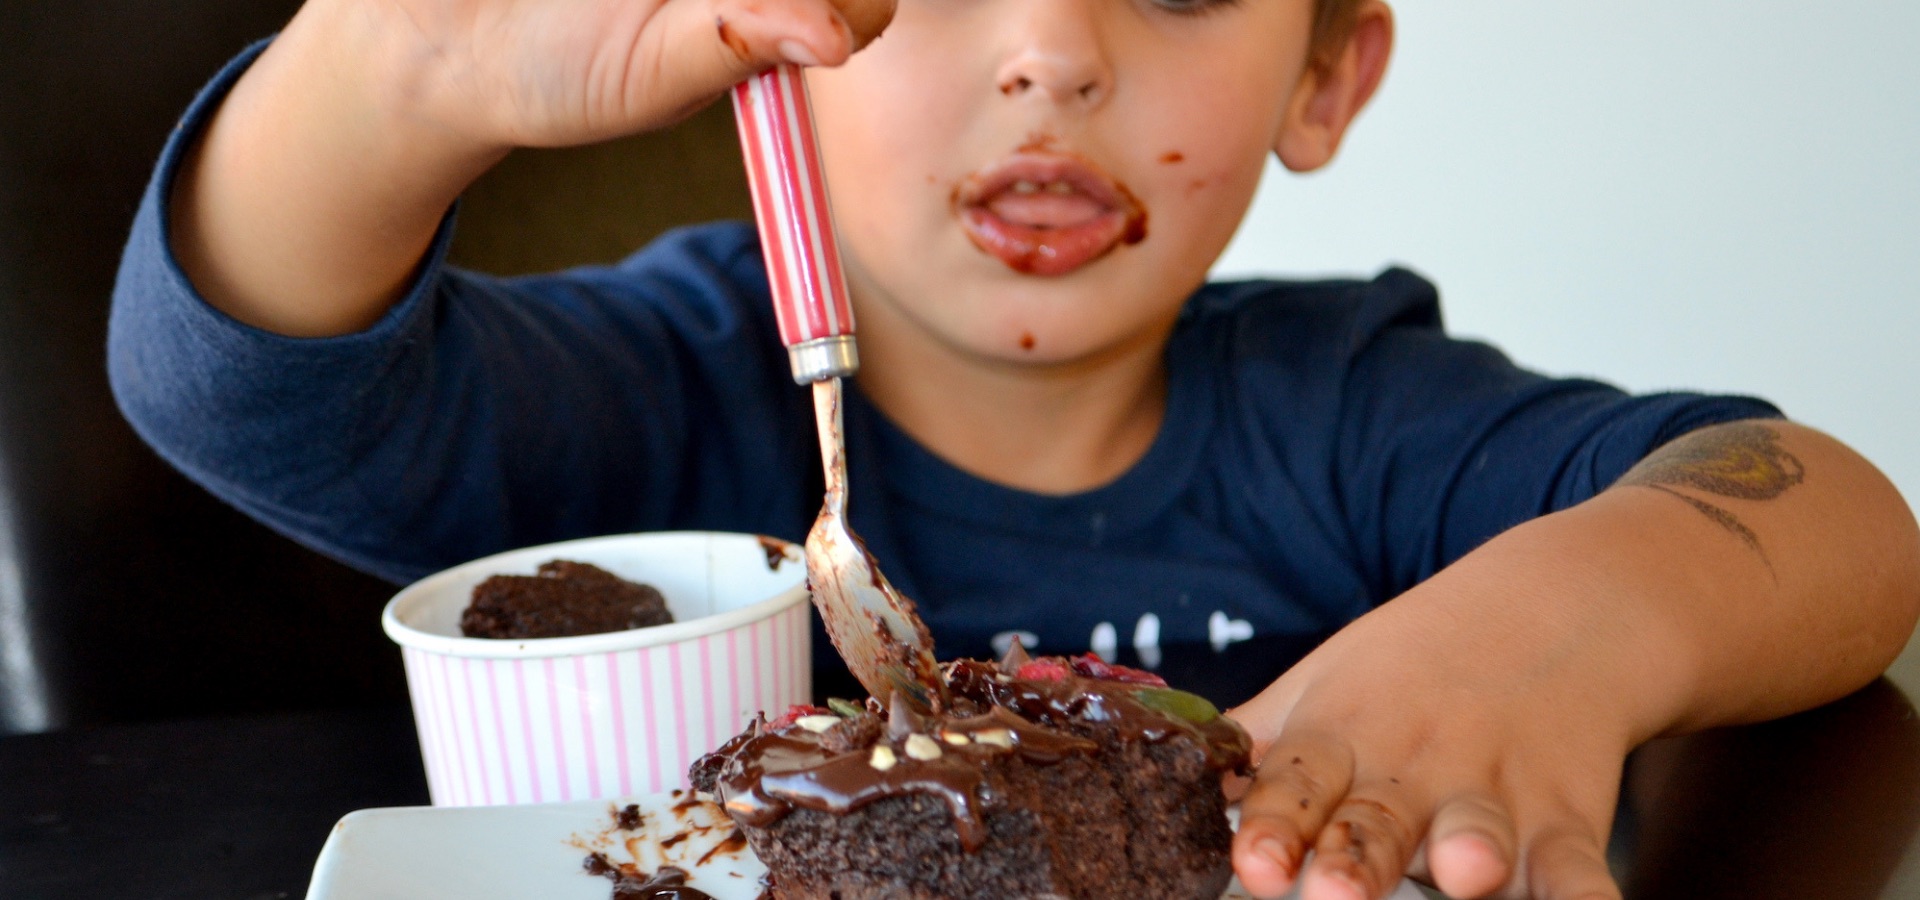 Introducing: NuMe Cake in a Cup | Parenting Hub